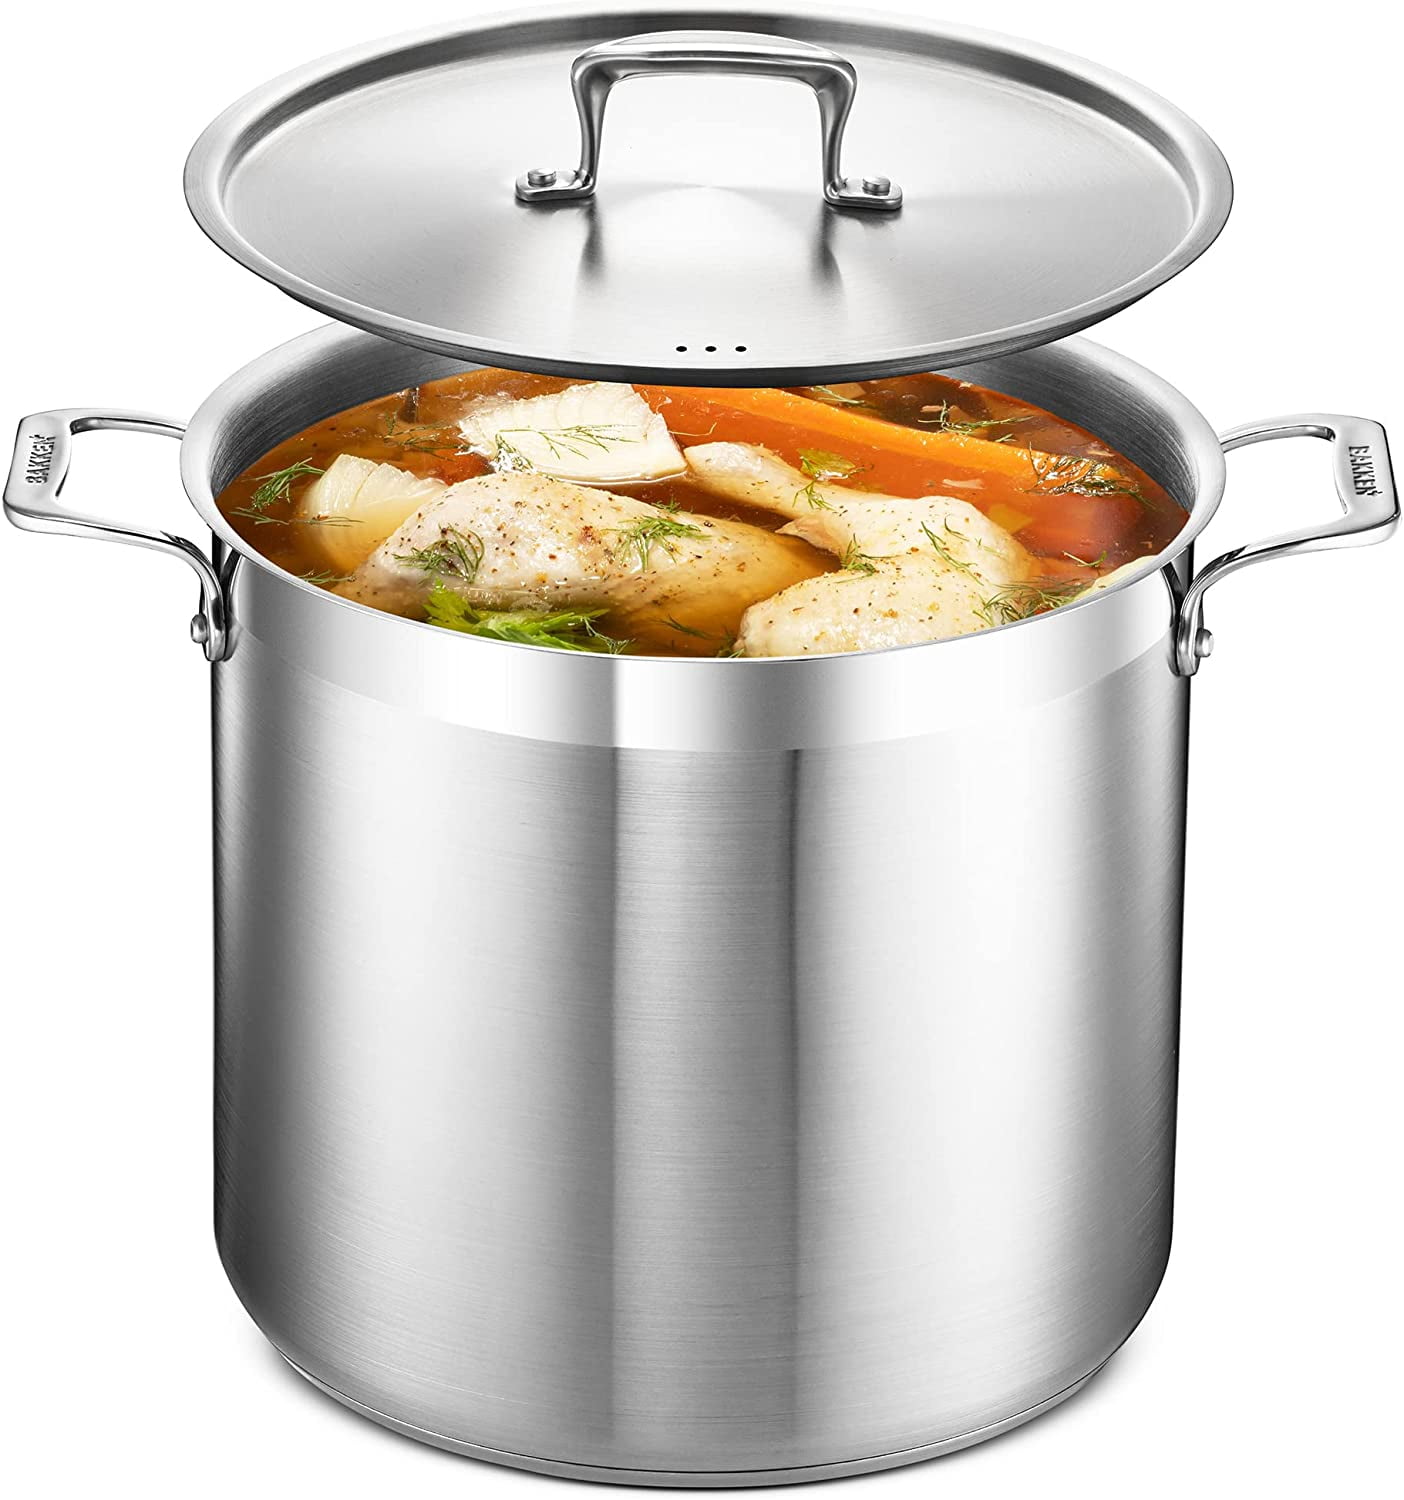 Stockpot – 5 Quart – Brushed Stainless Steel – Heavy Duty Induction Pot  with Lid and Riveted Handles – For Soup, Seafood, Stock, Canning and for  Catering for Large Groups and Events by BAKKEN - Bakkenswiss